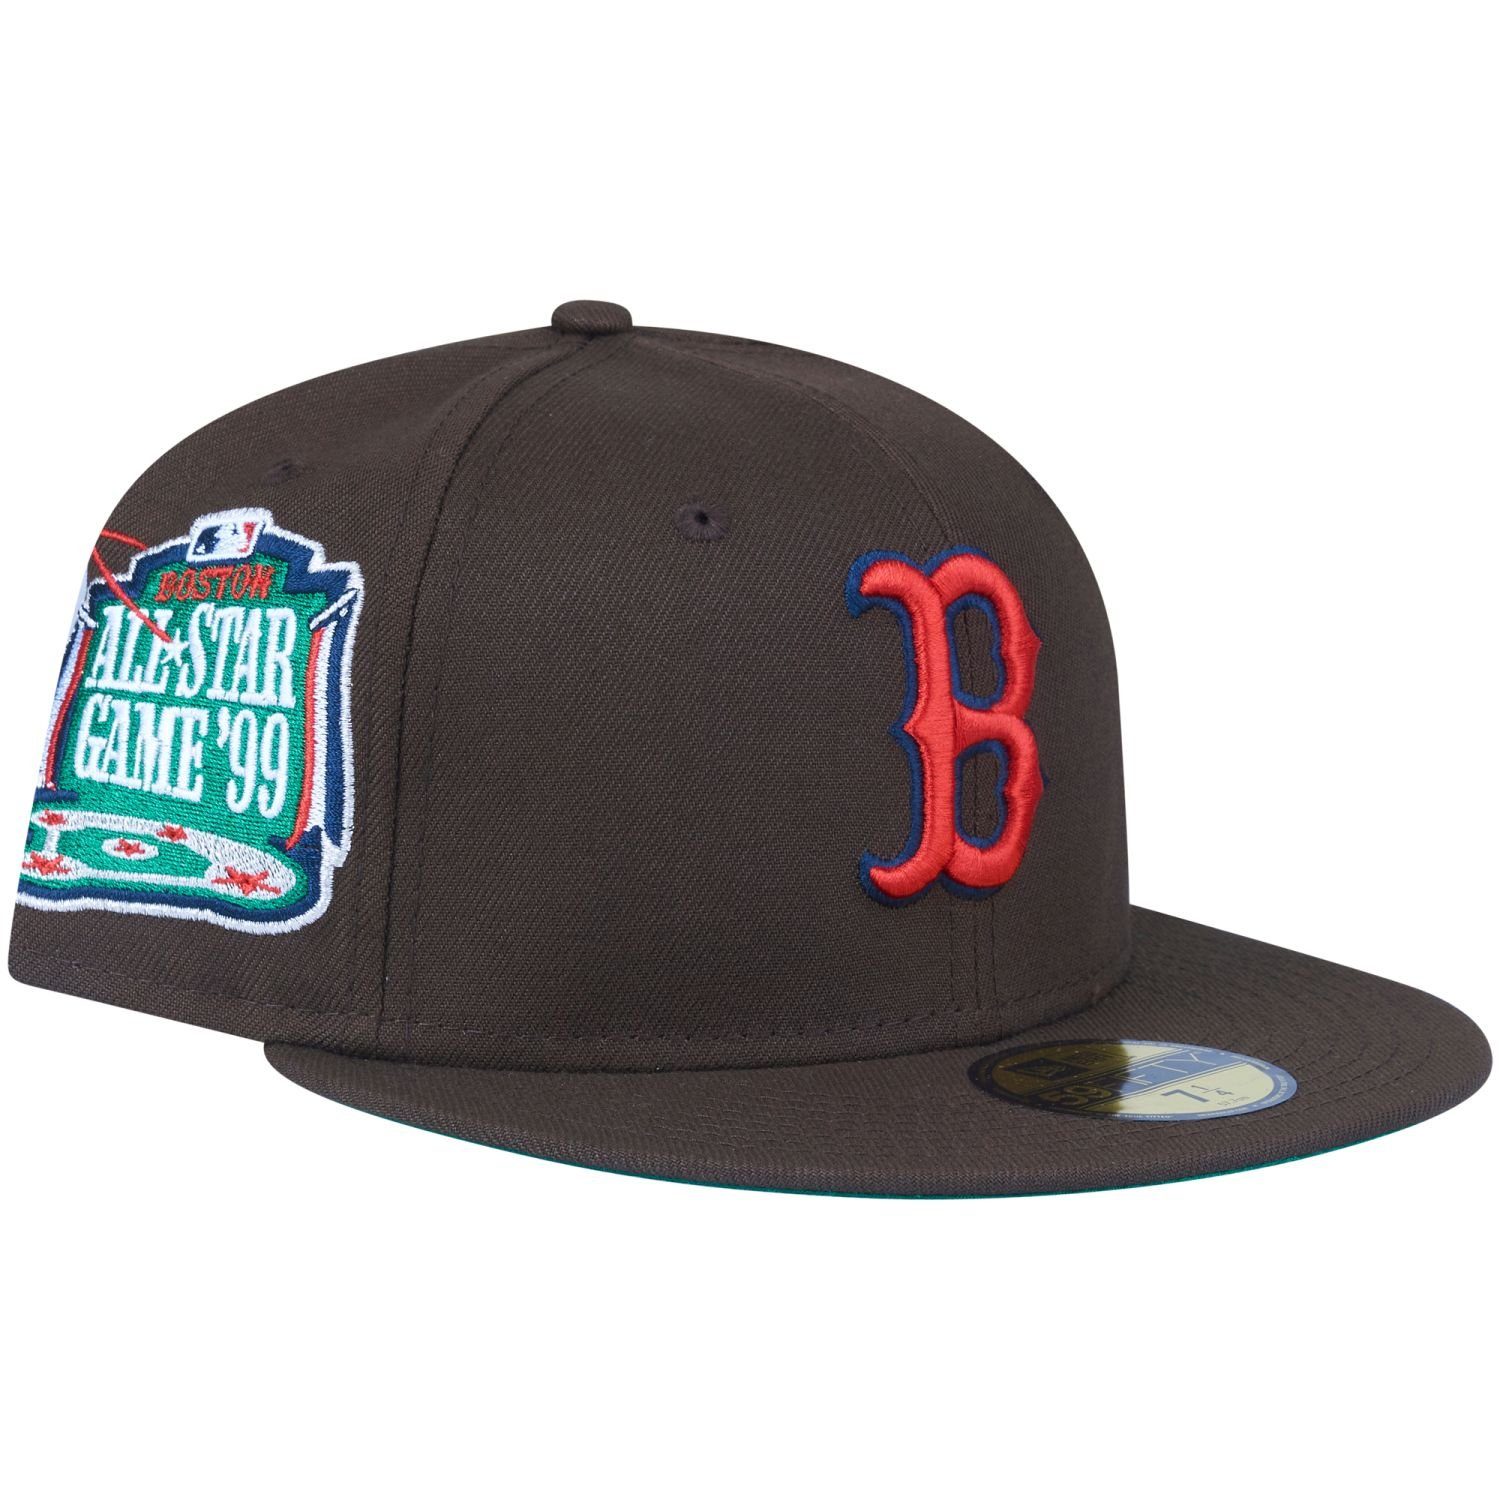 New Era Fitted Cap 59Fifty ASG 1999 Boston Red Sox walnut